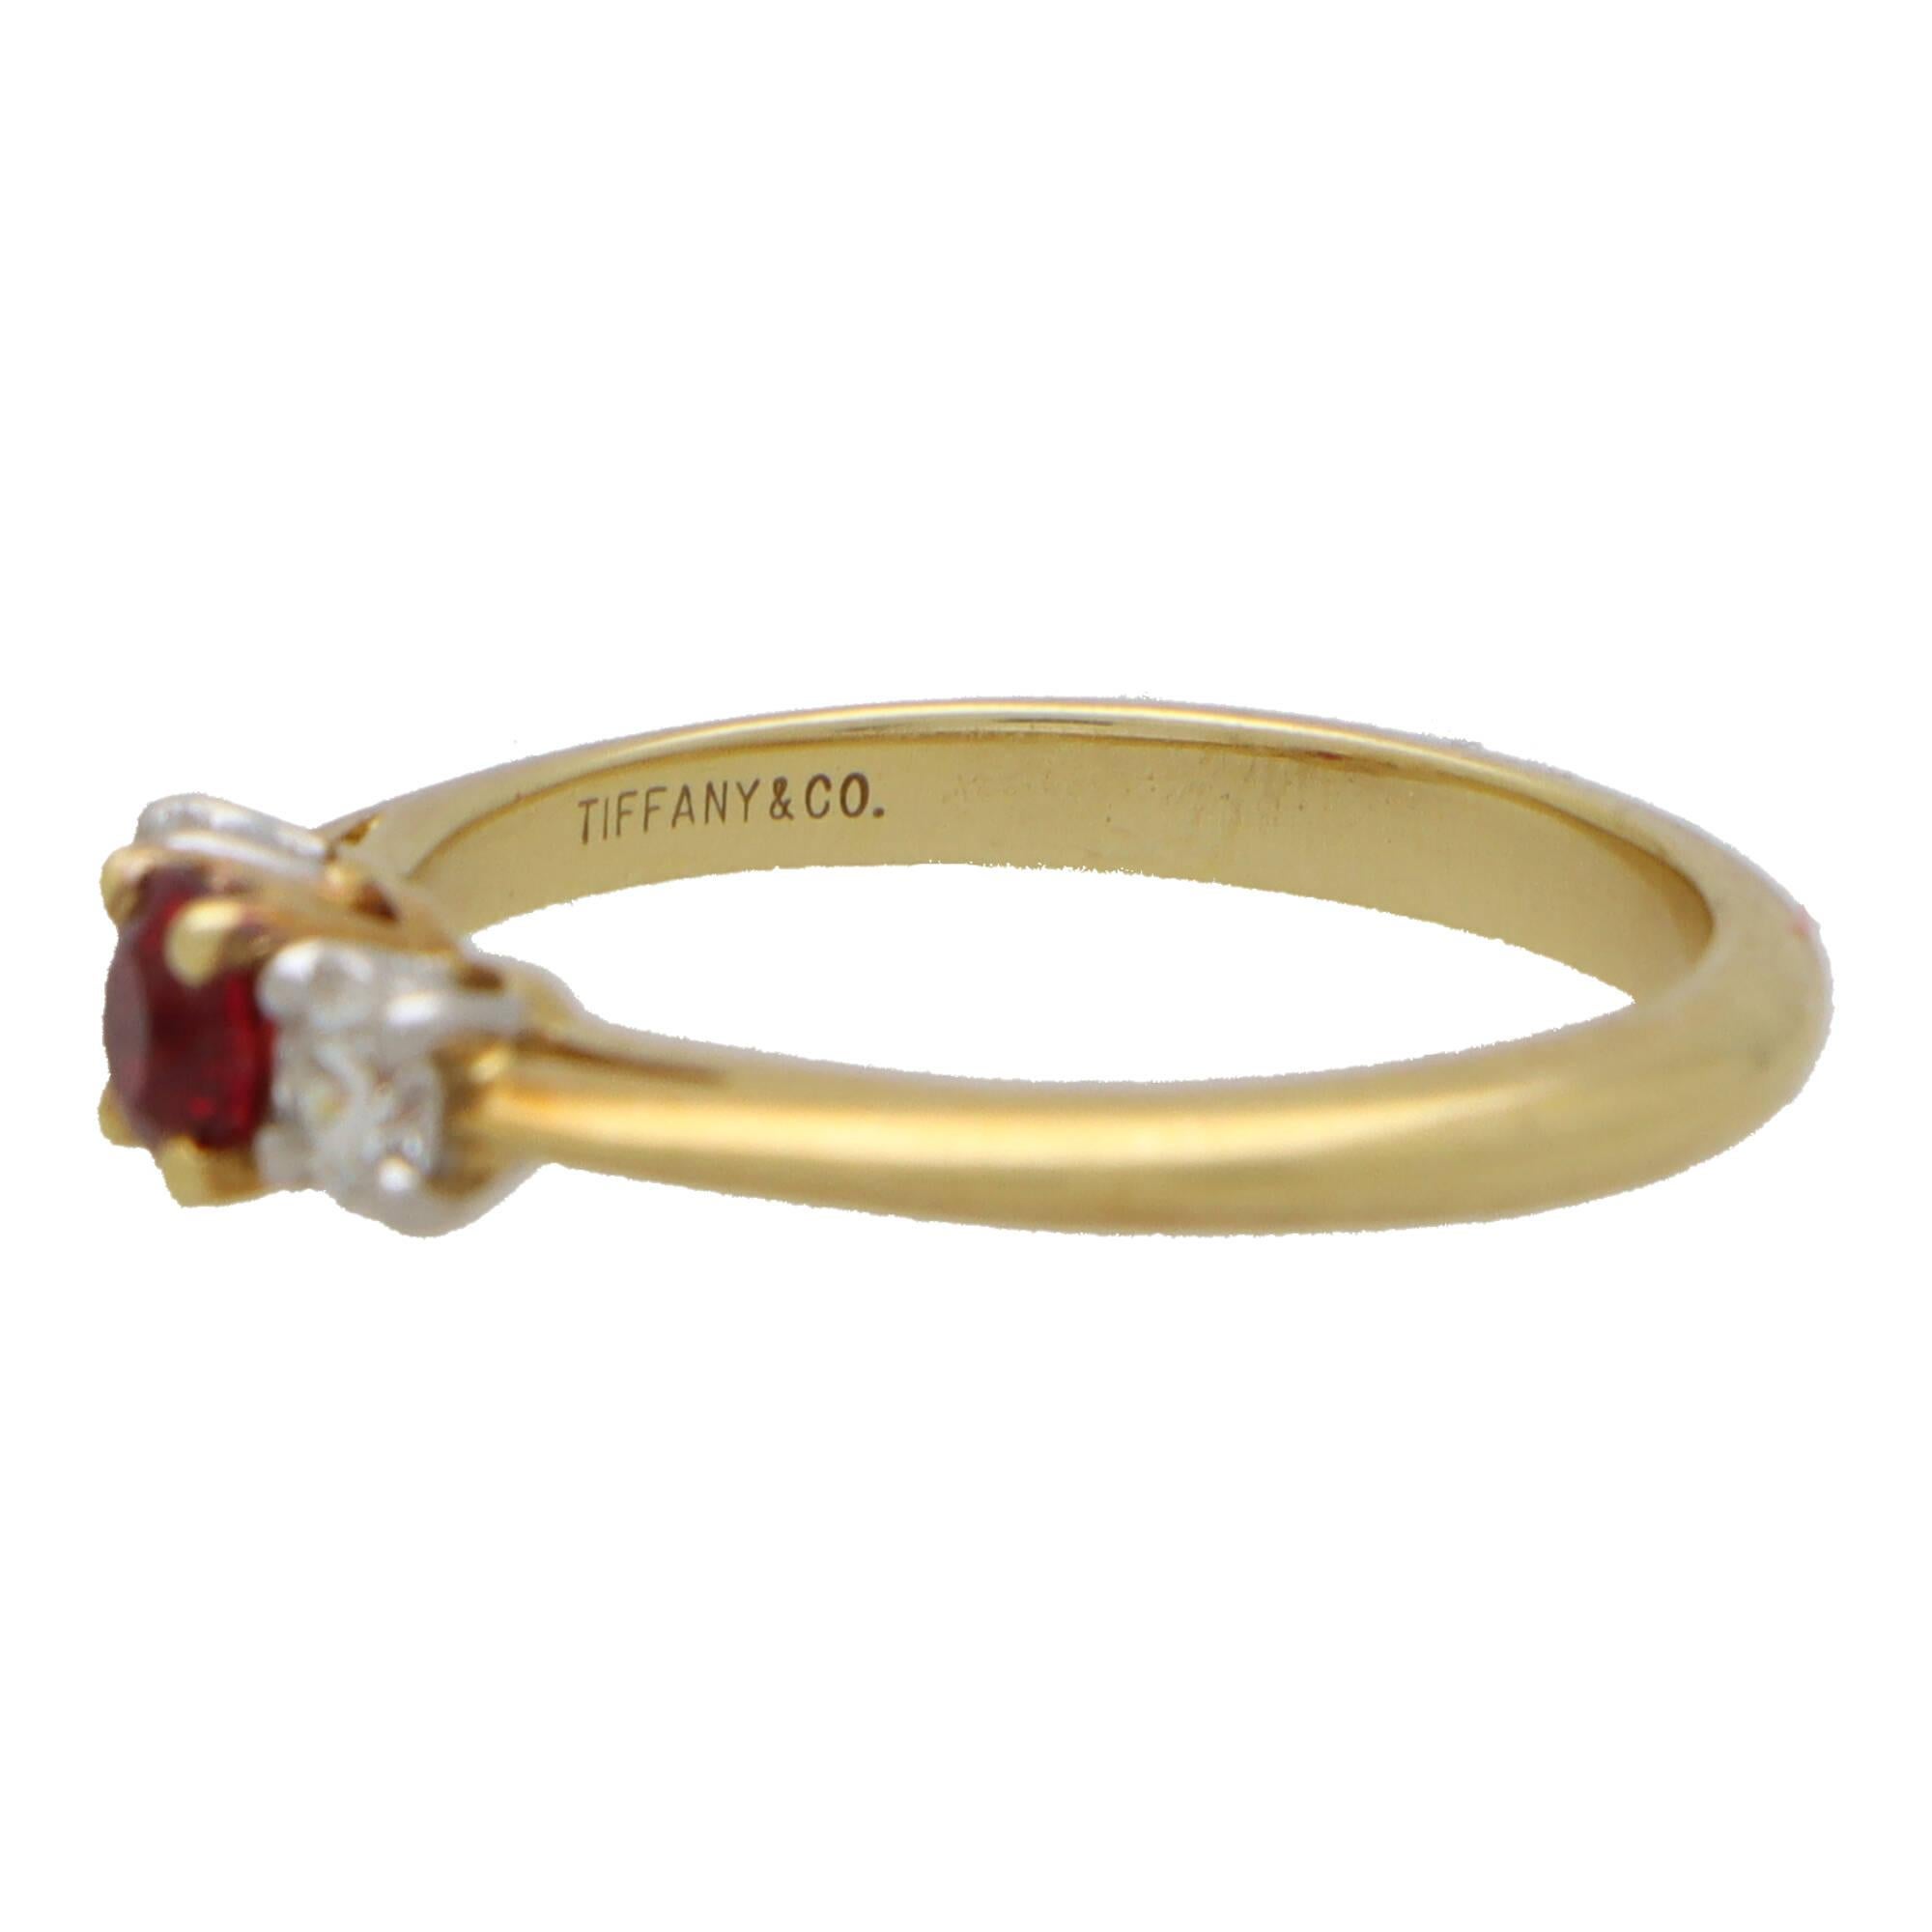 A beautiful ruby and diamond trilogy engagement ring set in 18k yellow gold and platinum.

This classic engagement ring design is centrally set with a stunning round cut ruby which is four claw set in an open back triple setting. The ruby is then